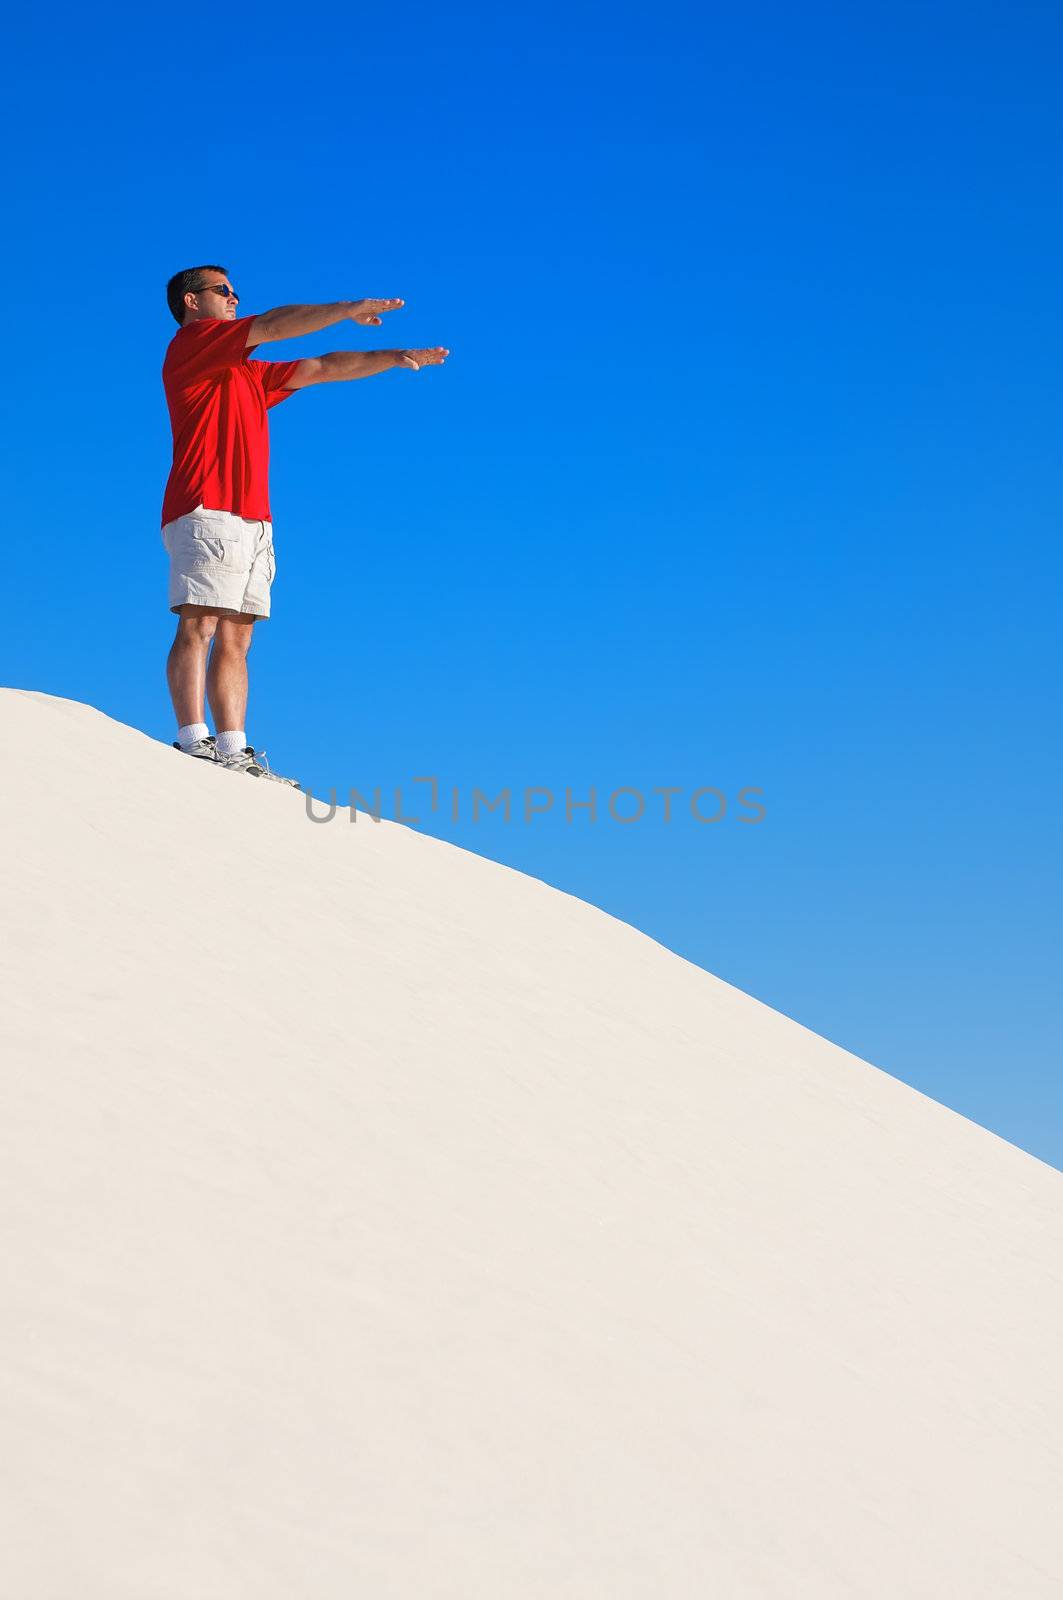 Man in a red shirt with his arms raised in a yoga pose looking off into the distance on top of a white sand dune with a blue sky